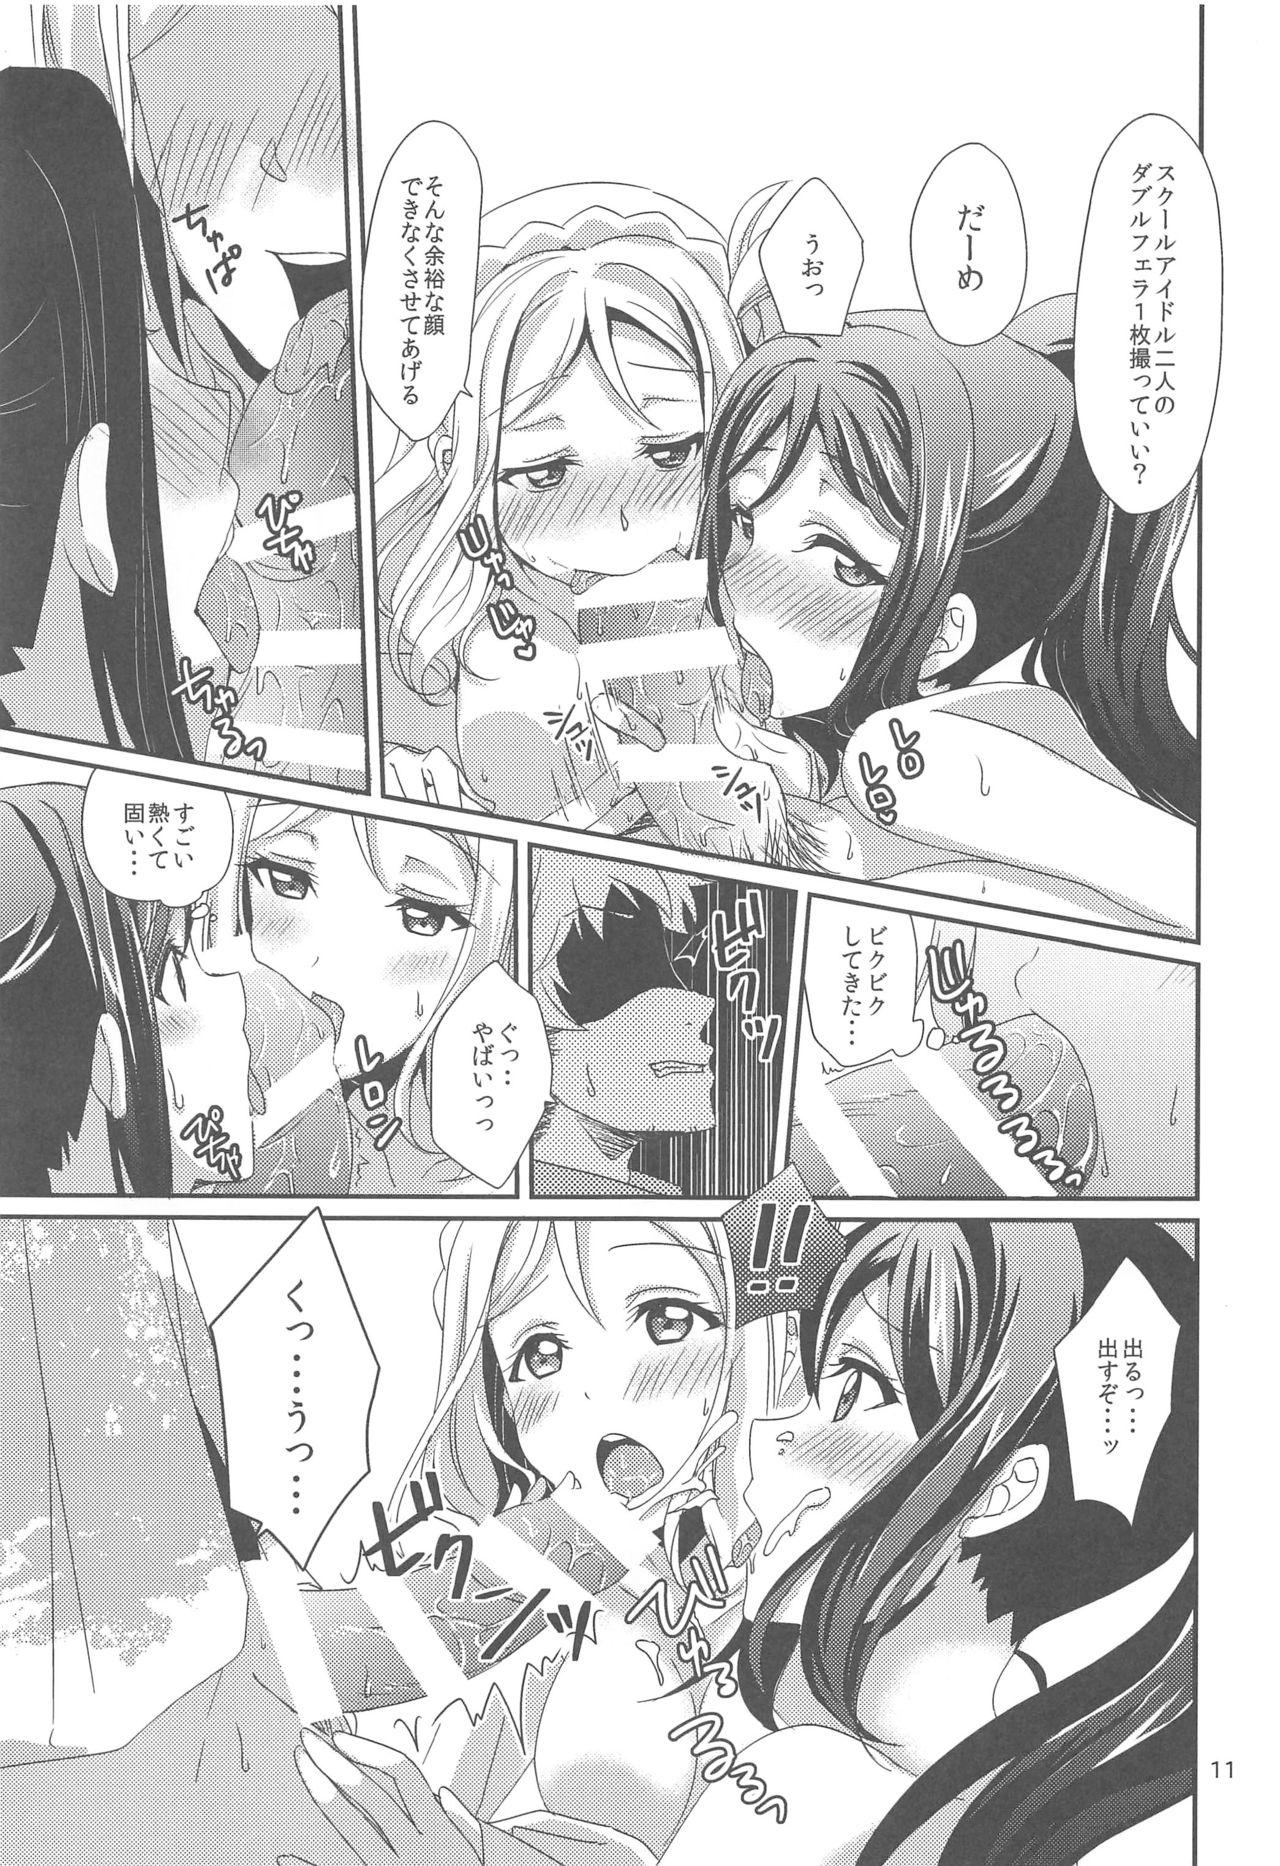 Hot 3P PARTY TRAIN - Love live sunshine Dyke - Page 12